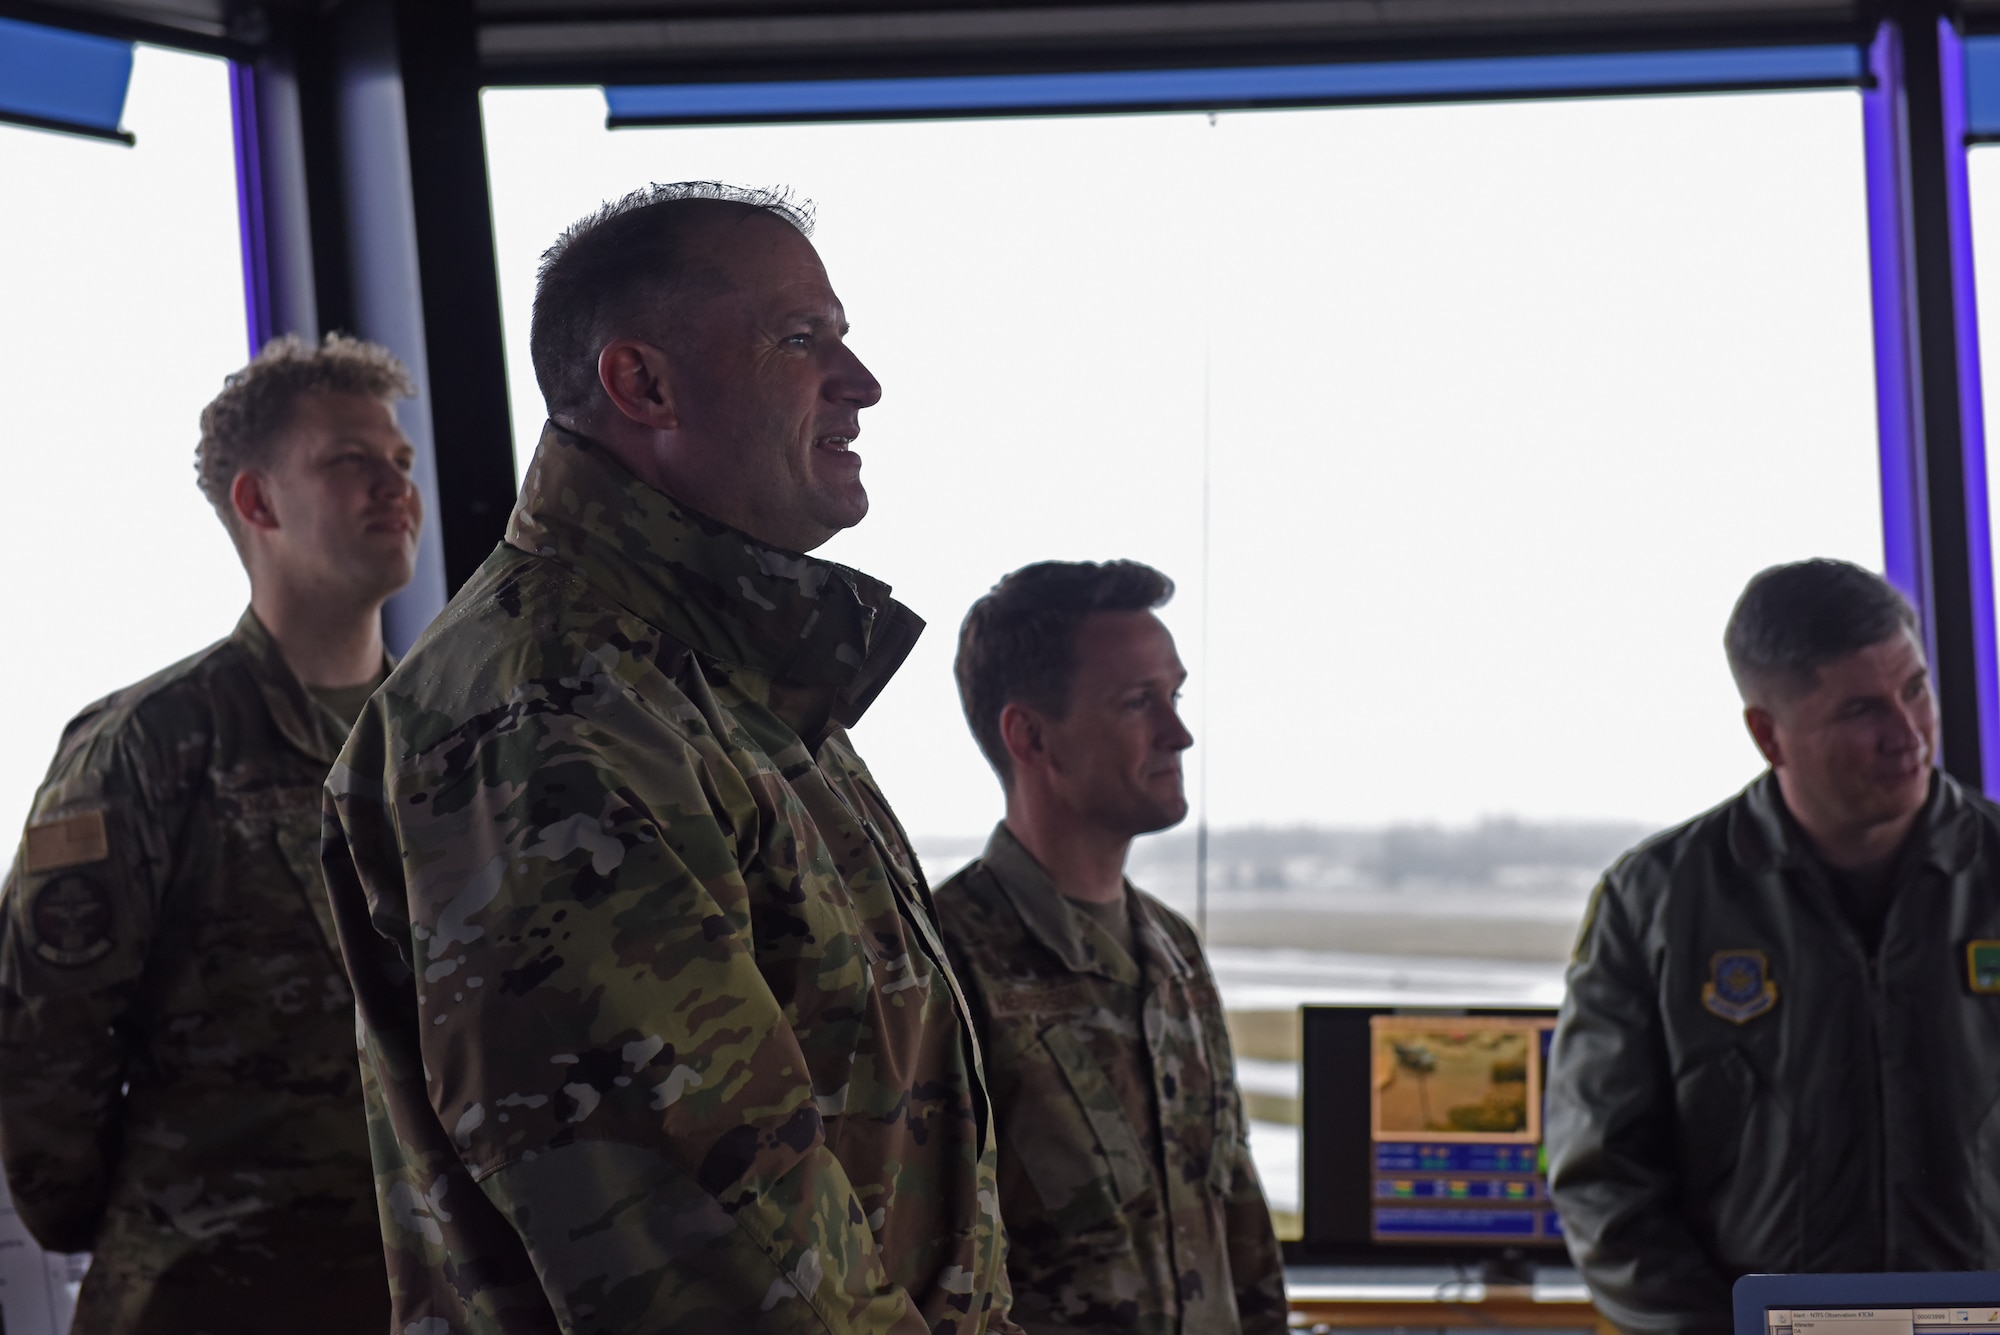 (Center) U.S. Air Force Maj. Gen. Thad Bibb, 18th Air Force commander, engages with 62nd Airlift Wing air traffic controllers, during his visit at Joint Base Lewis-McChord, Washington, March 14, 2022. Bibb and U.S. Air Force Chief Master Sgt. Chad Bickley, 18th AF command chief, spent two days visiting 62nd AW units and recognized several of the wing’s outstanding performers during their time. (U.S. Air Force photo/Senior Airman Zoe Thacker)